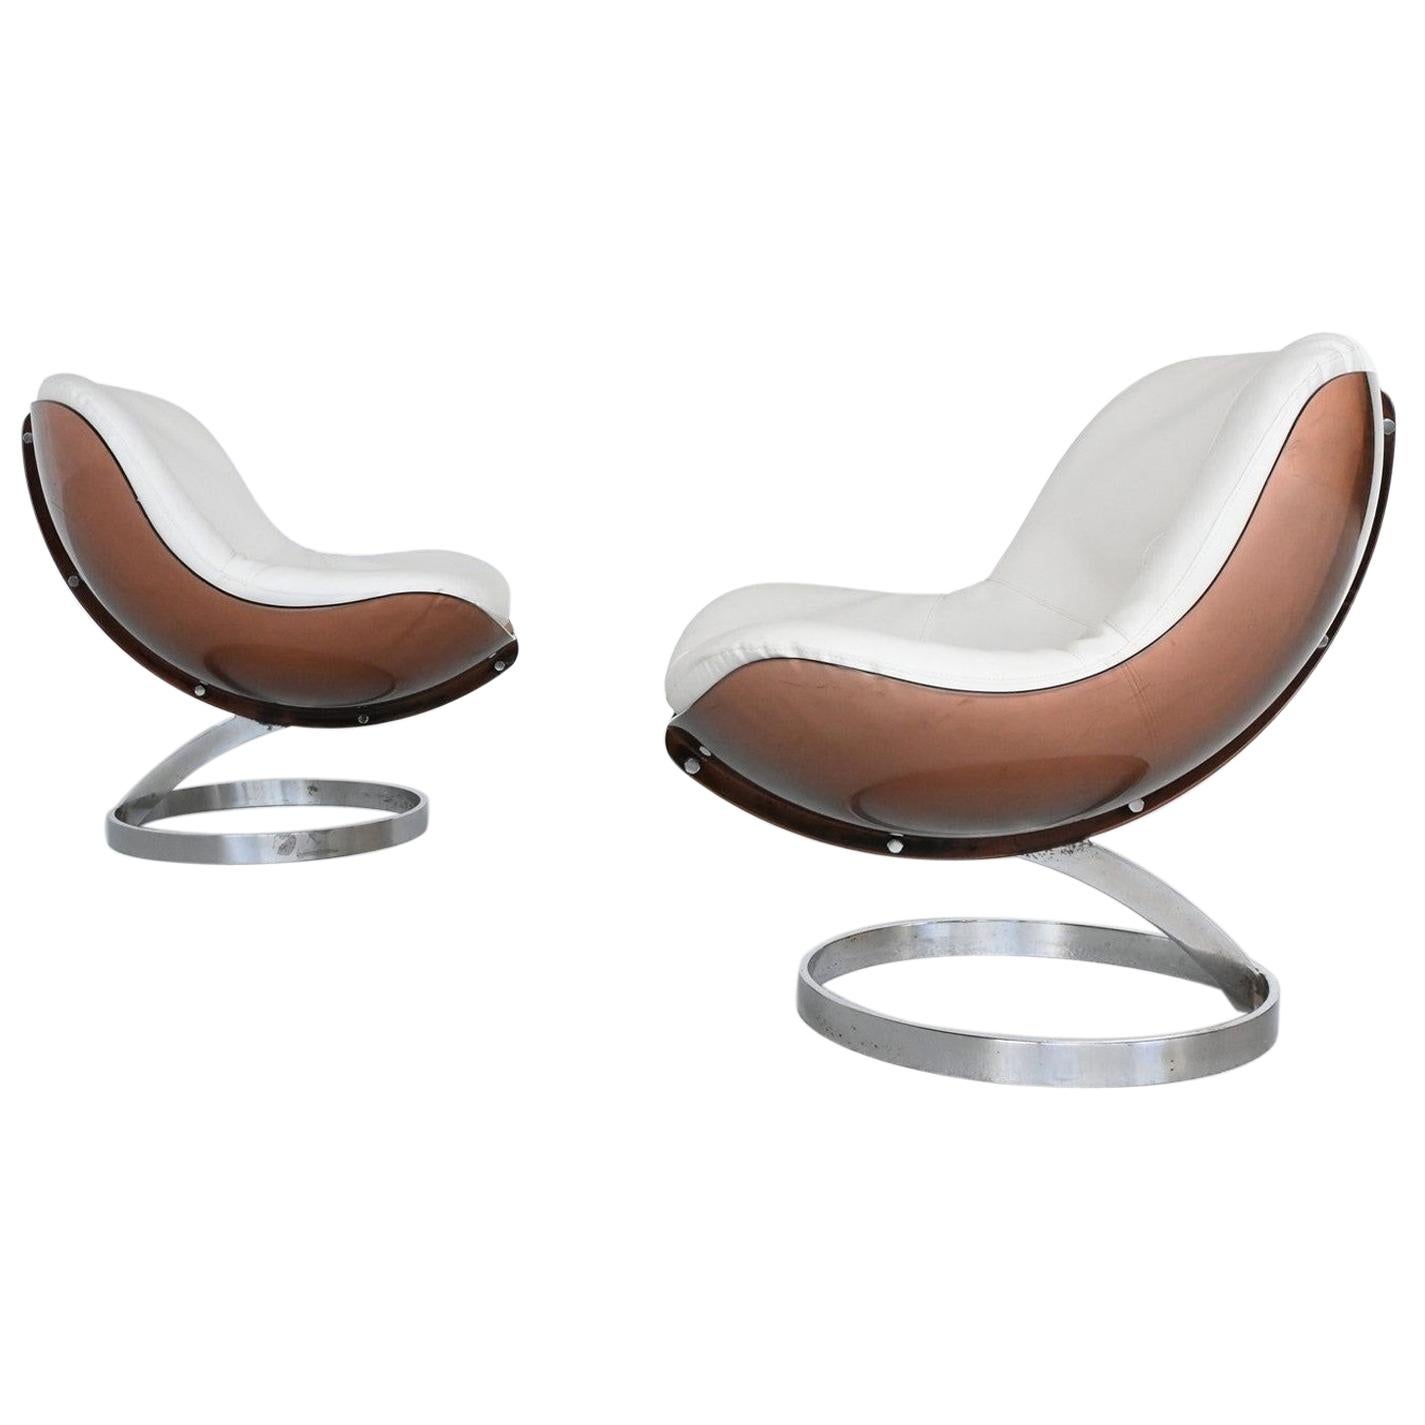 Boris Tabacoff Sphere lounge chairs Mobilier Modulair Moderne, France, 1971